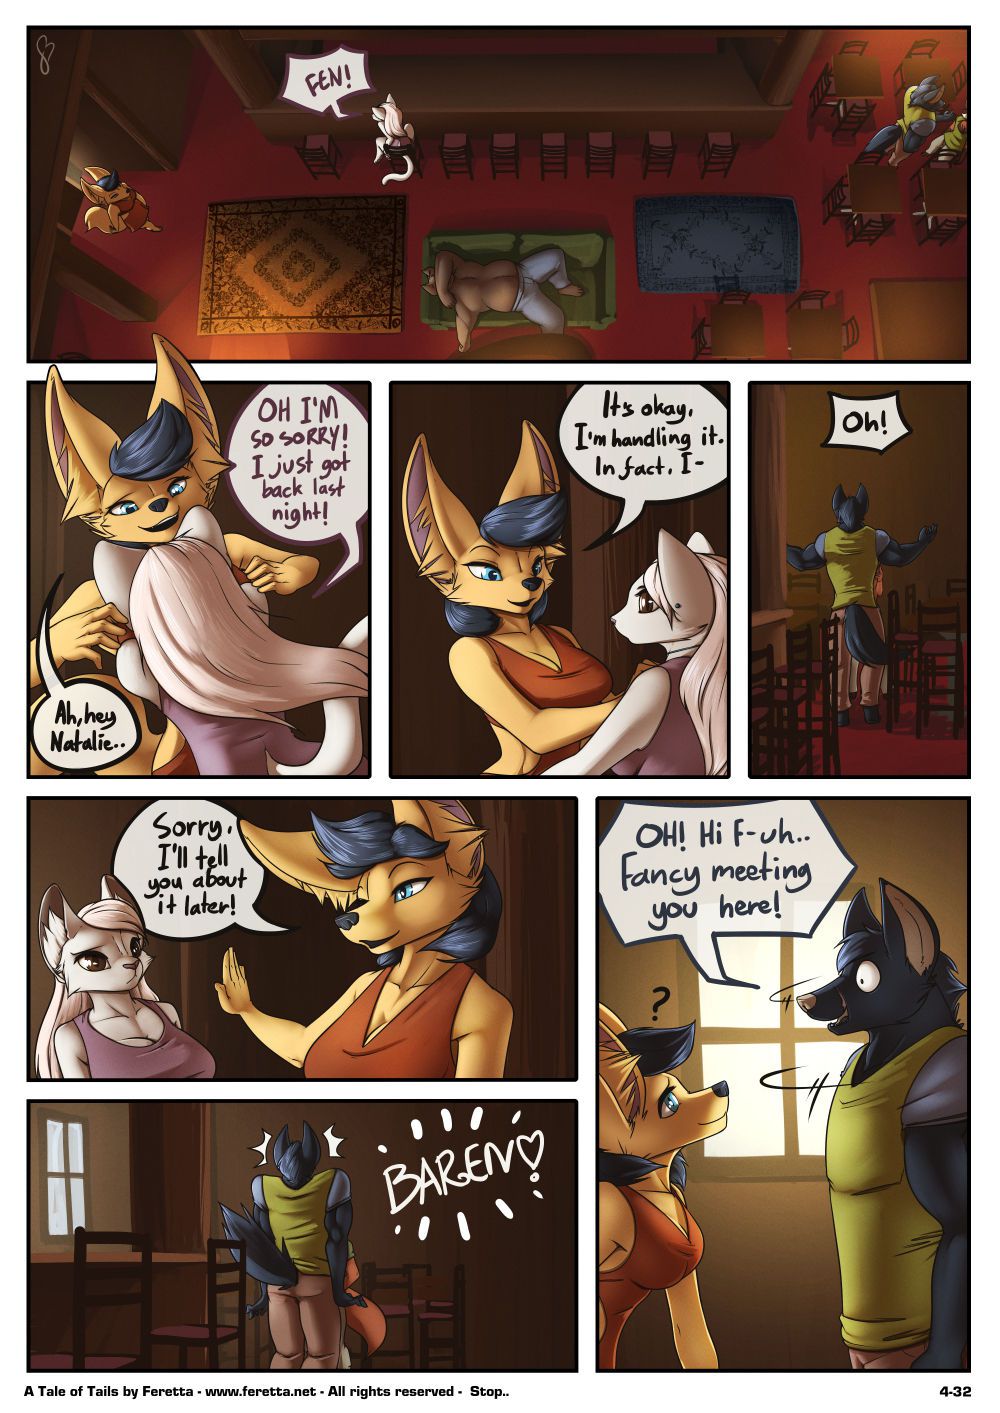 [Feretta] A Tale of Tails: Chapter 4 -  Matters of the mind 32